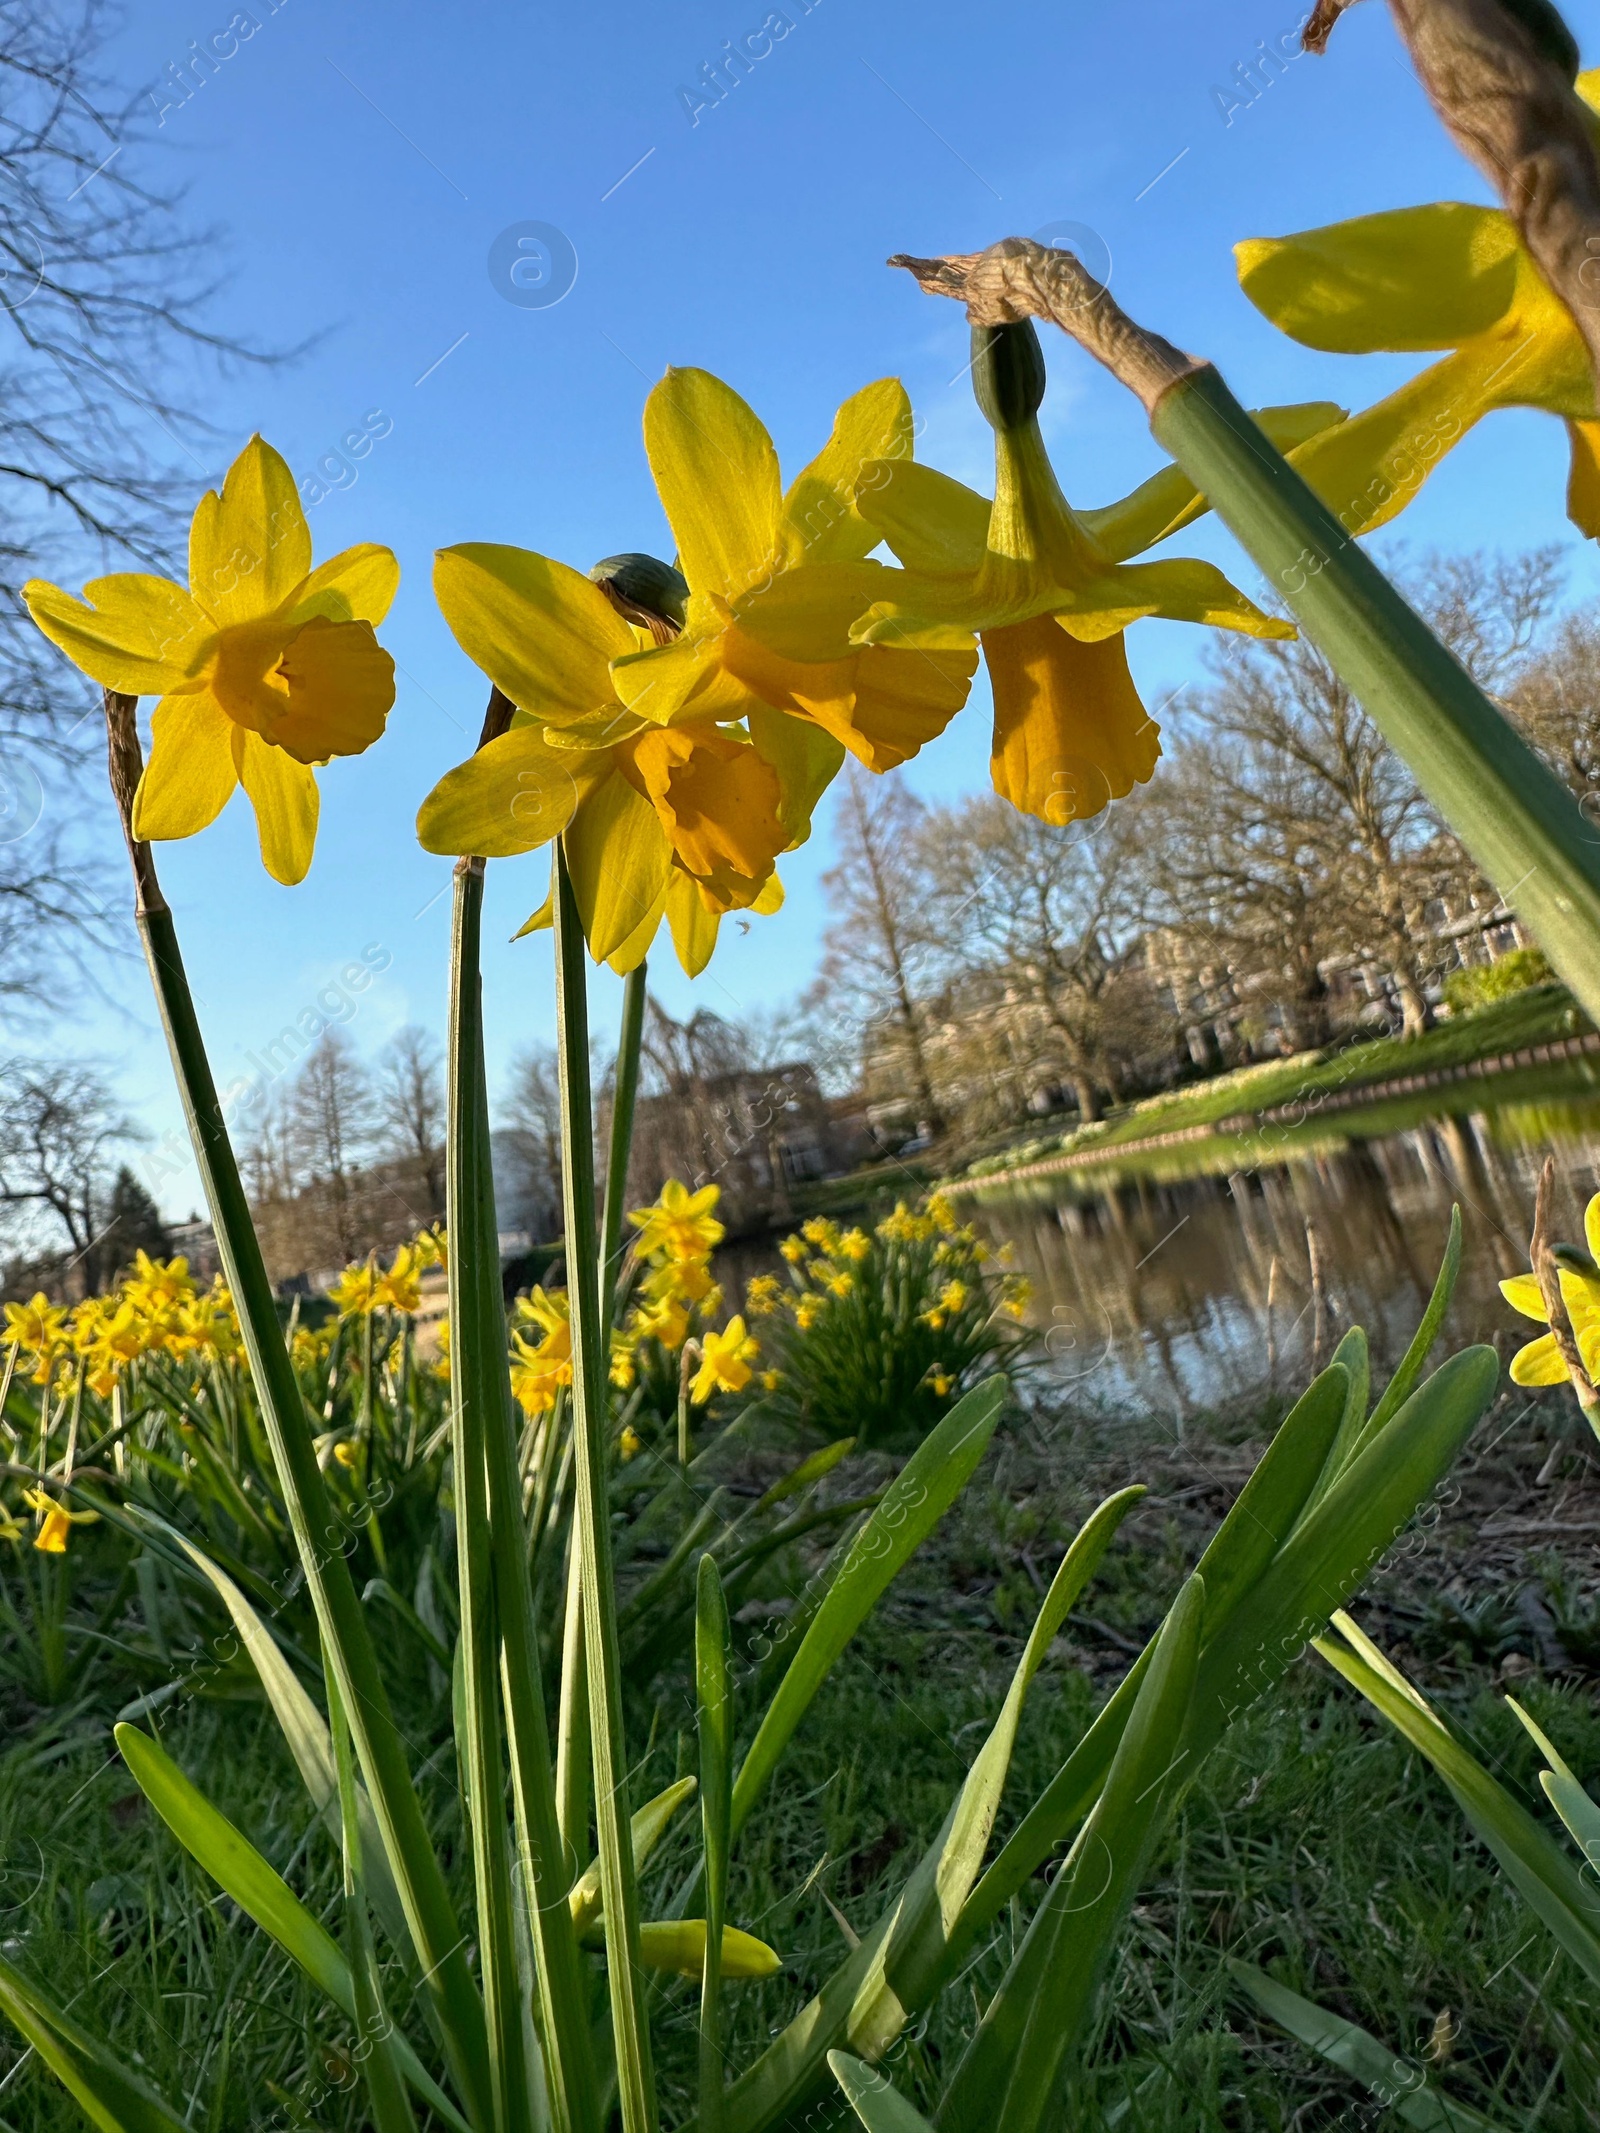 Photo of Yellow narcissus flowers and green grass growing outdoors, low angle view